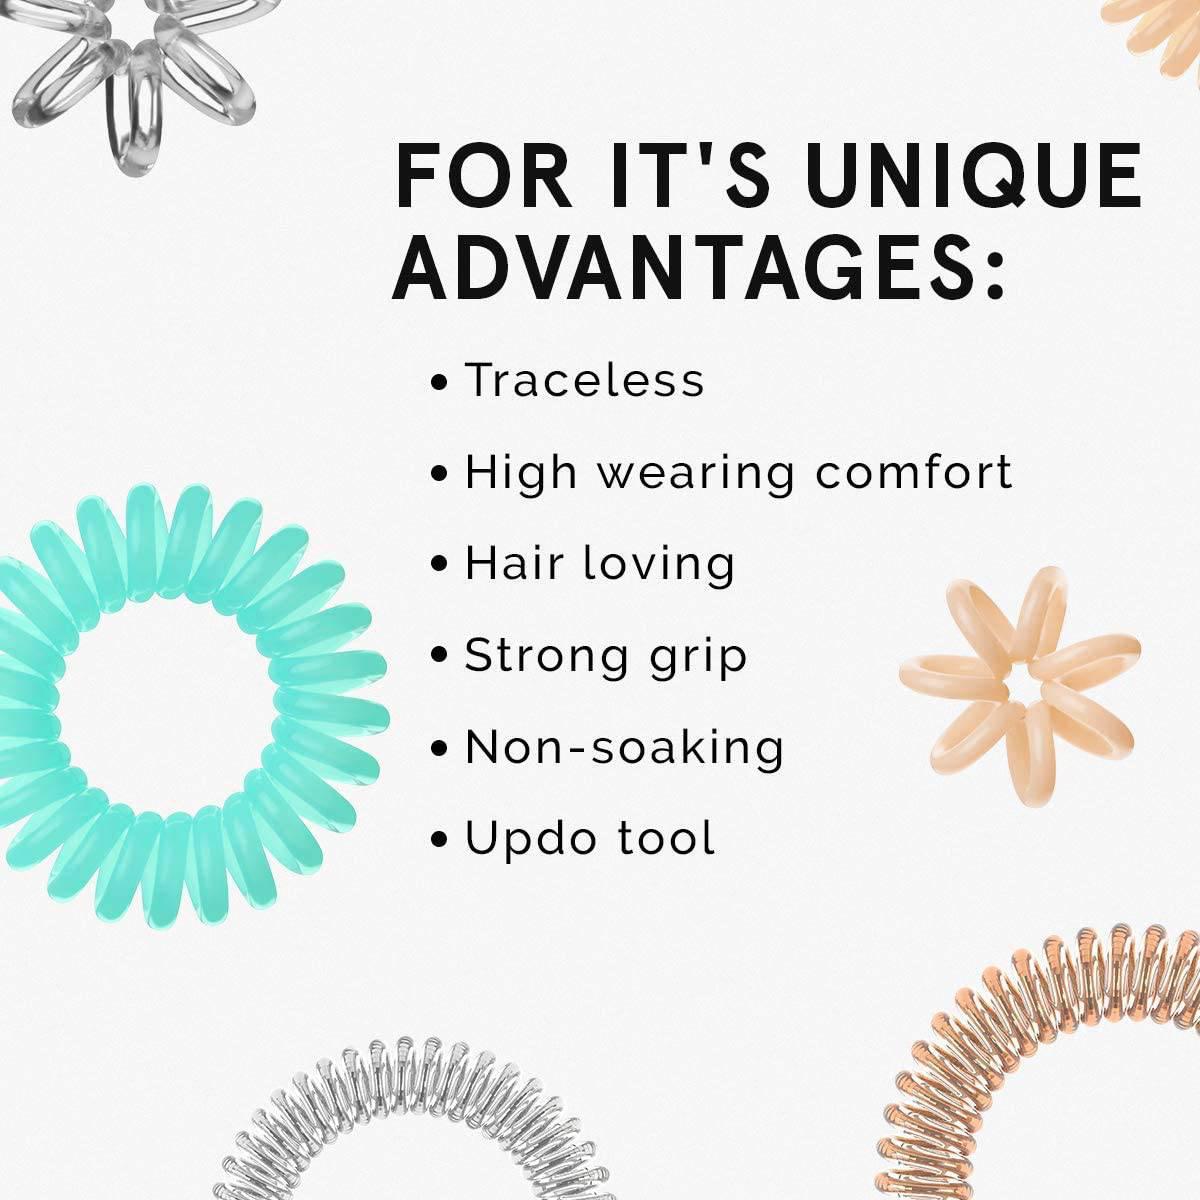 Invisibobble ORIGINAL Hair Ties, True Black, 3 Pack - Traceless, Strong Hold, Waterproof - Suitable for All Hair Types - Healthxpress.ie